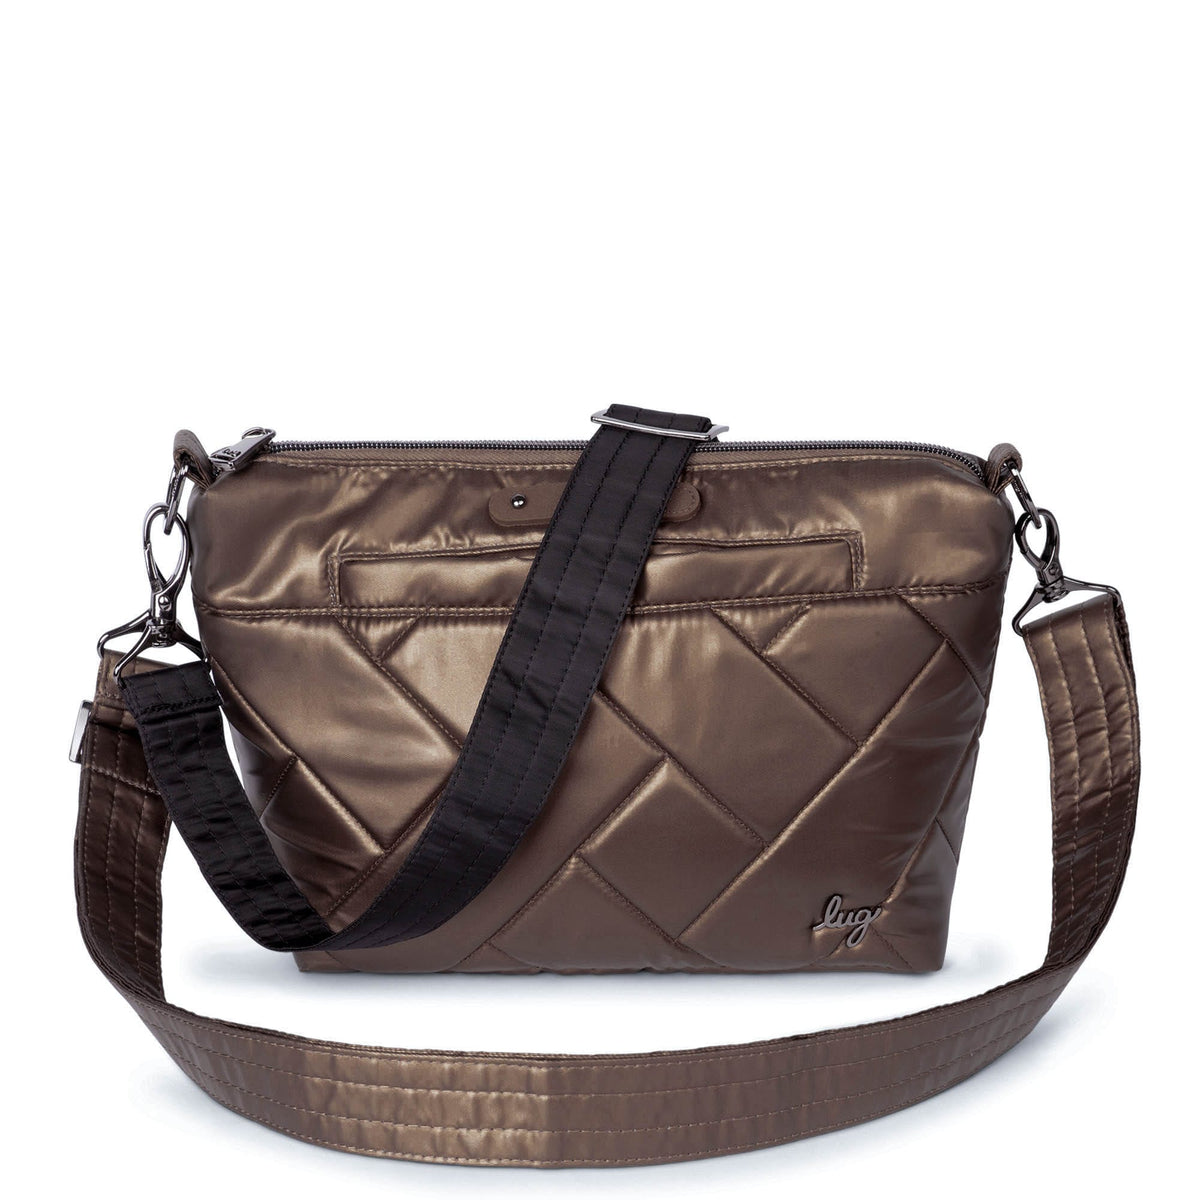 Quilted Crossbody 